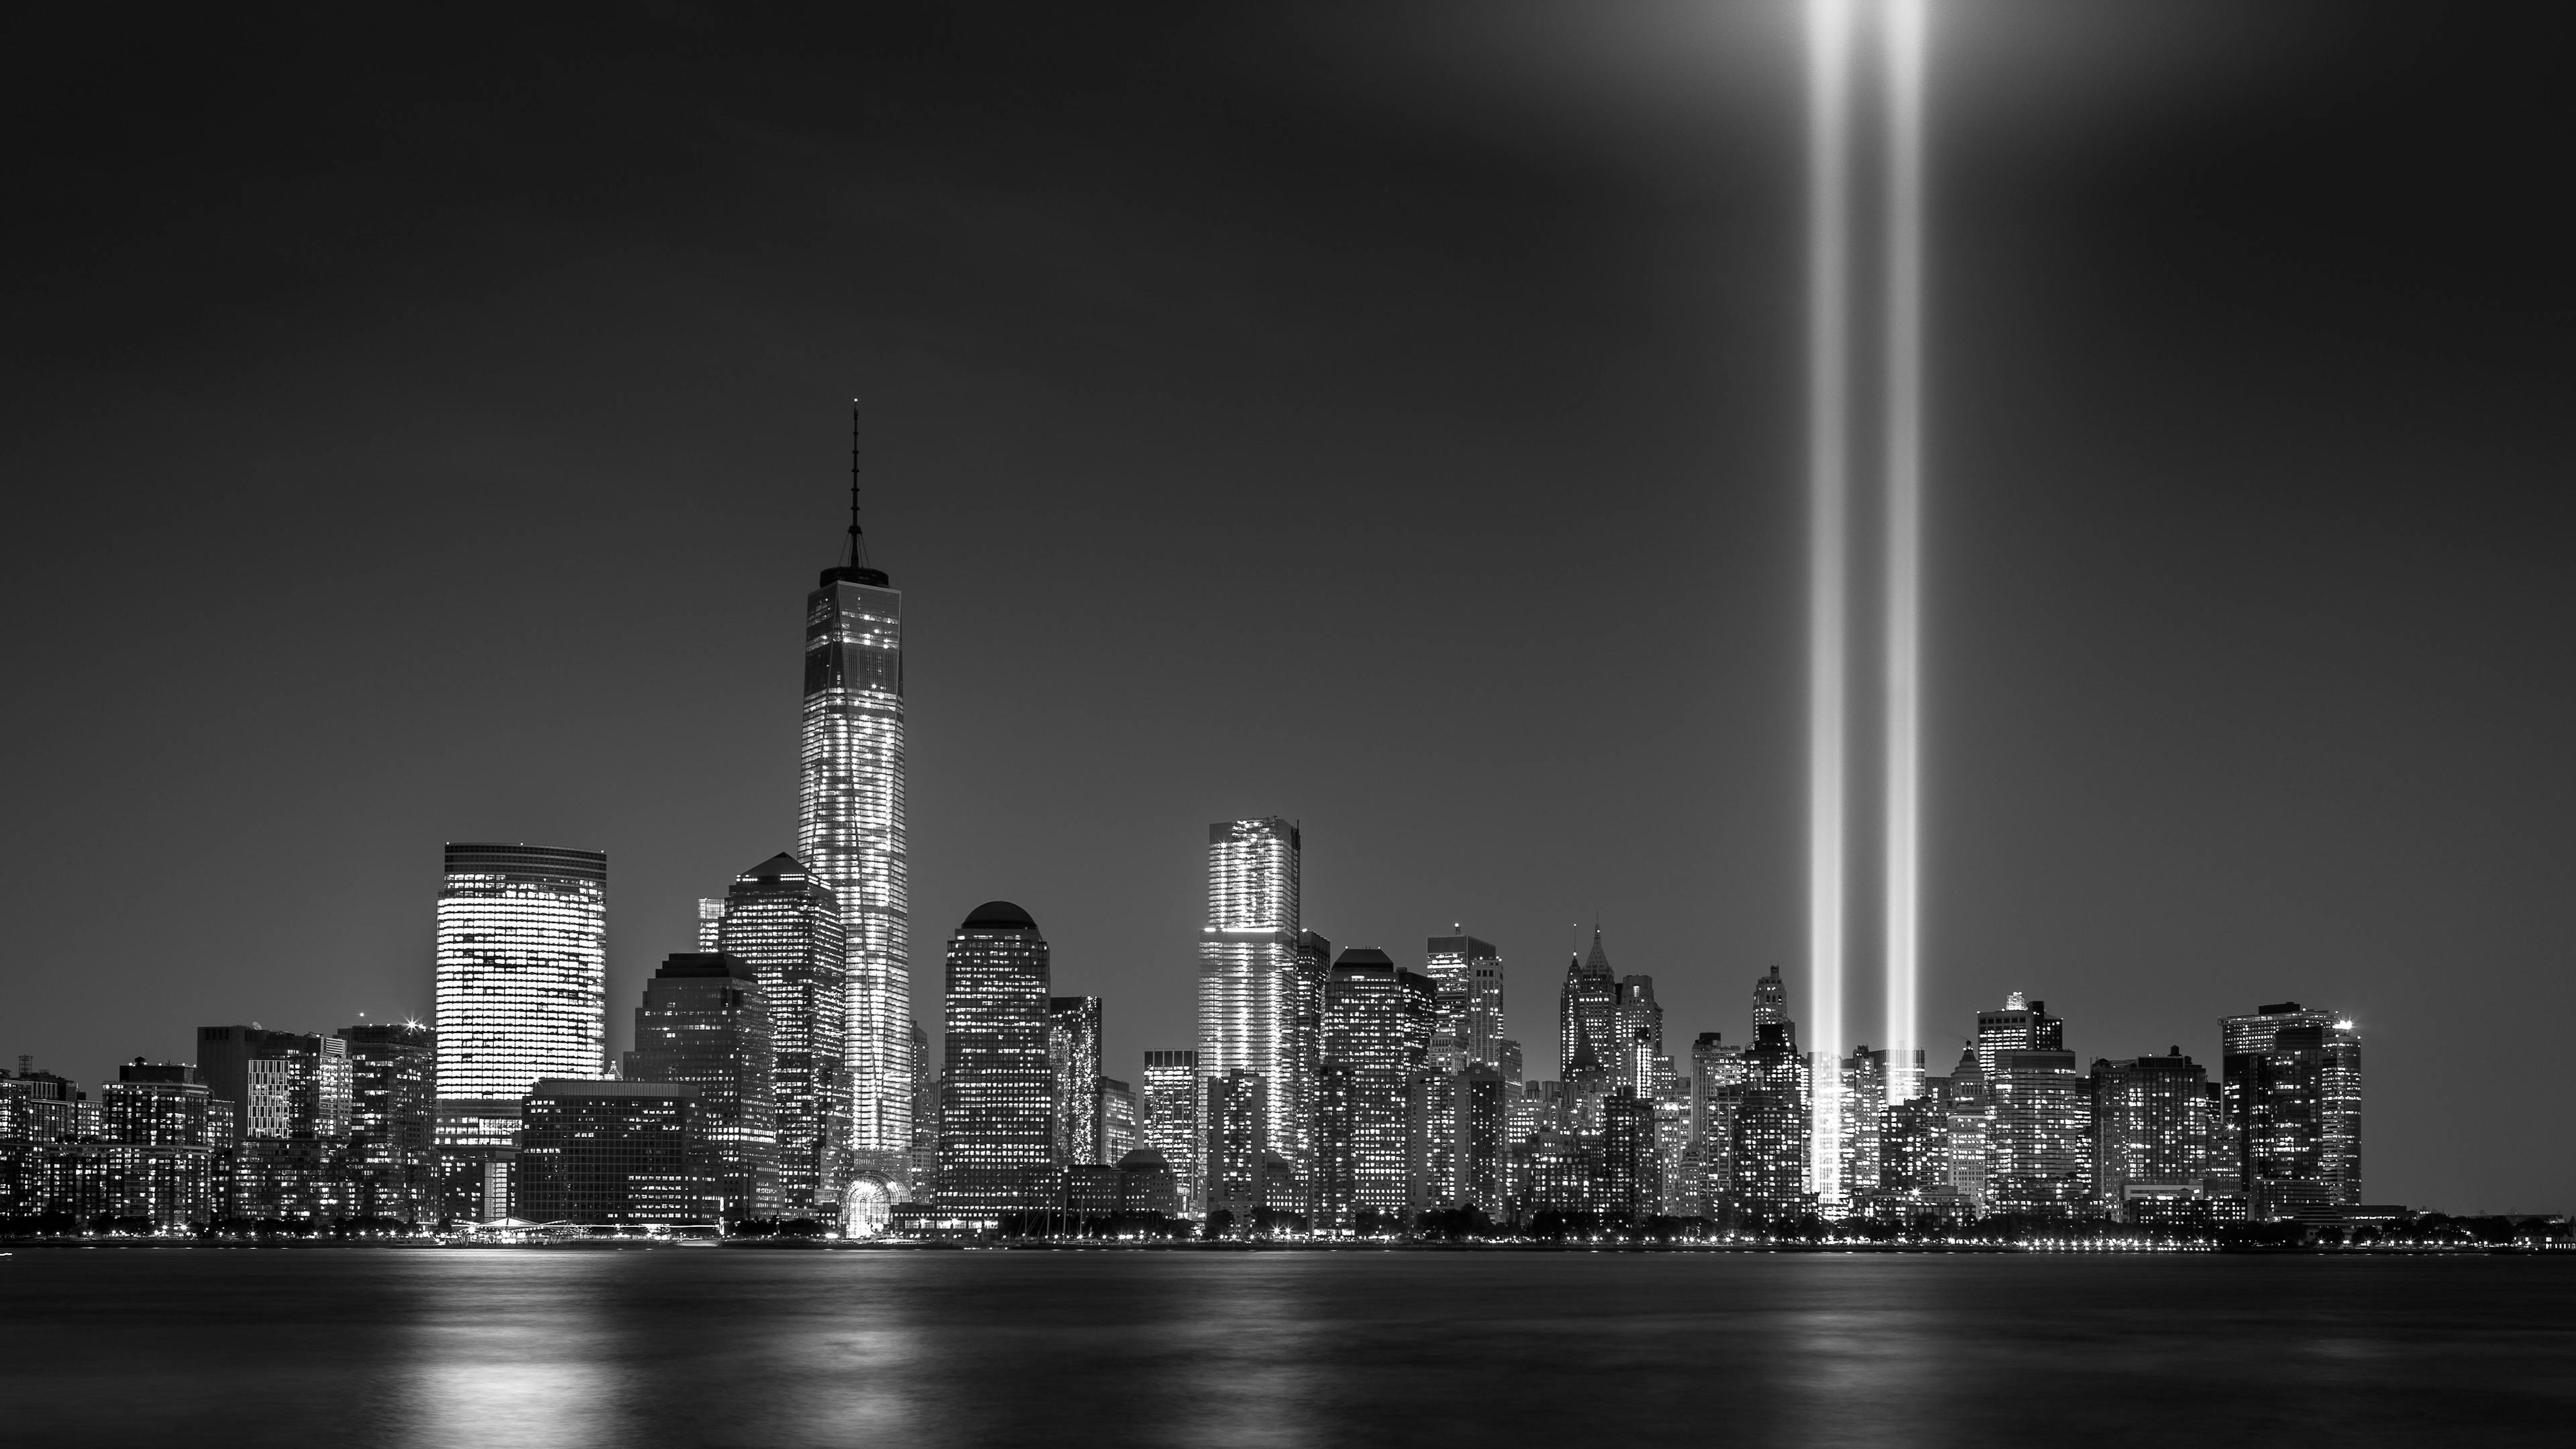 Posttraumatic Growth: Reflections on 9/11